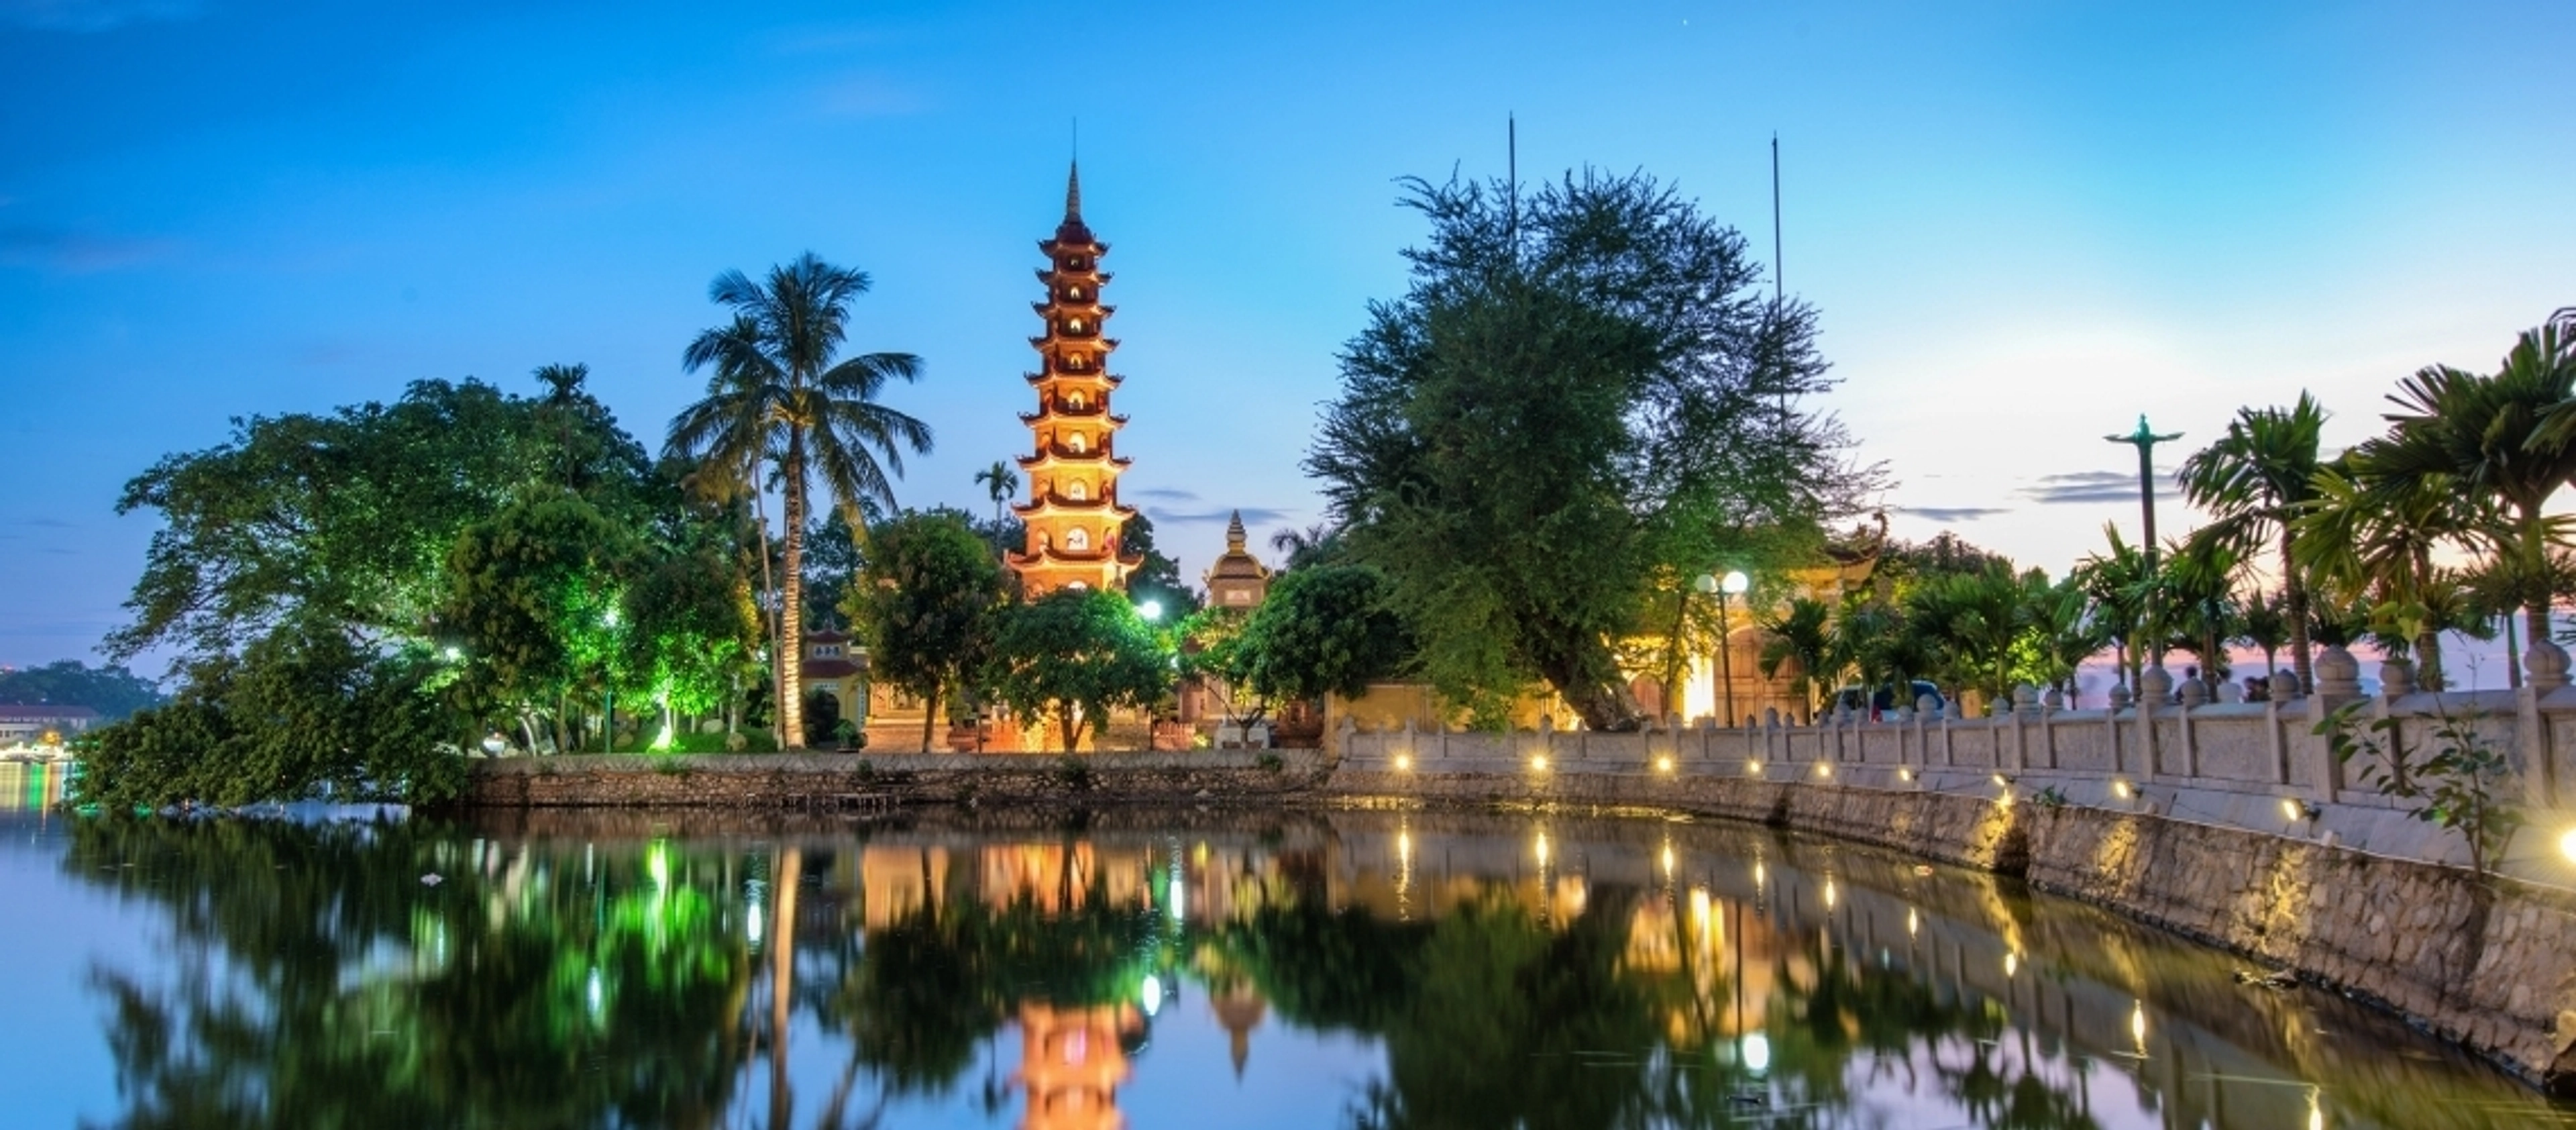 Tran Quoc Pagoda - The oldest and most sacred pagoda in Hanoi